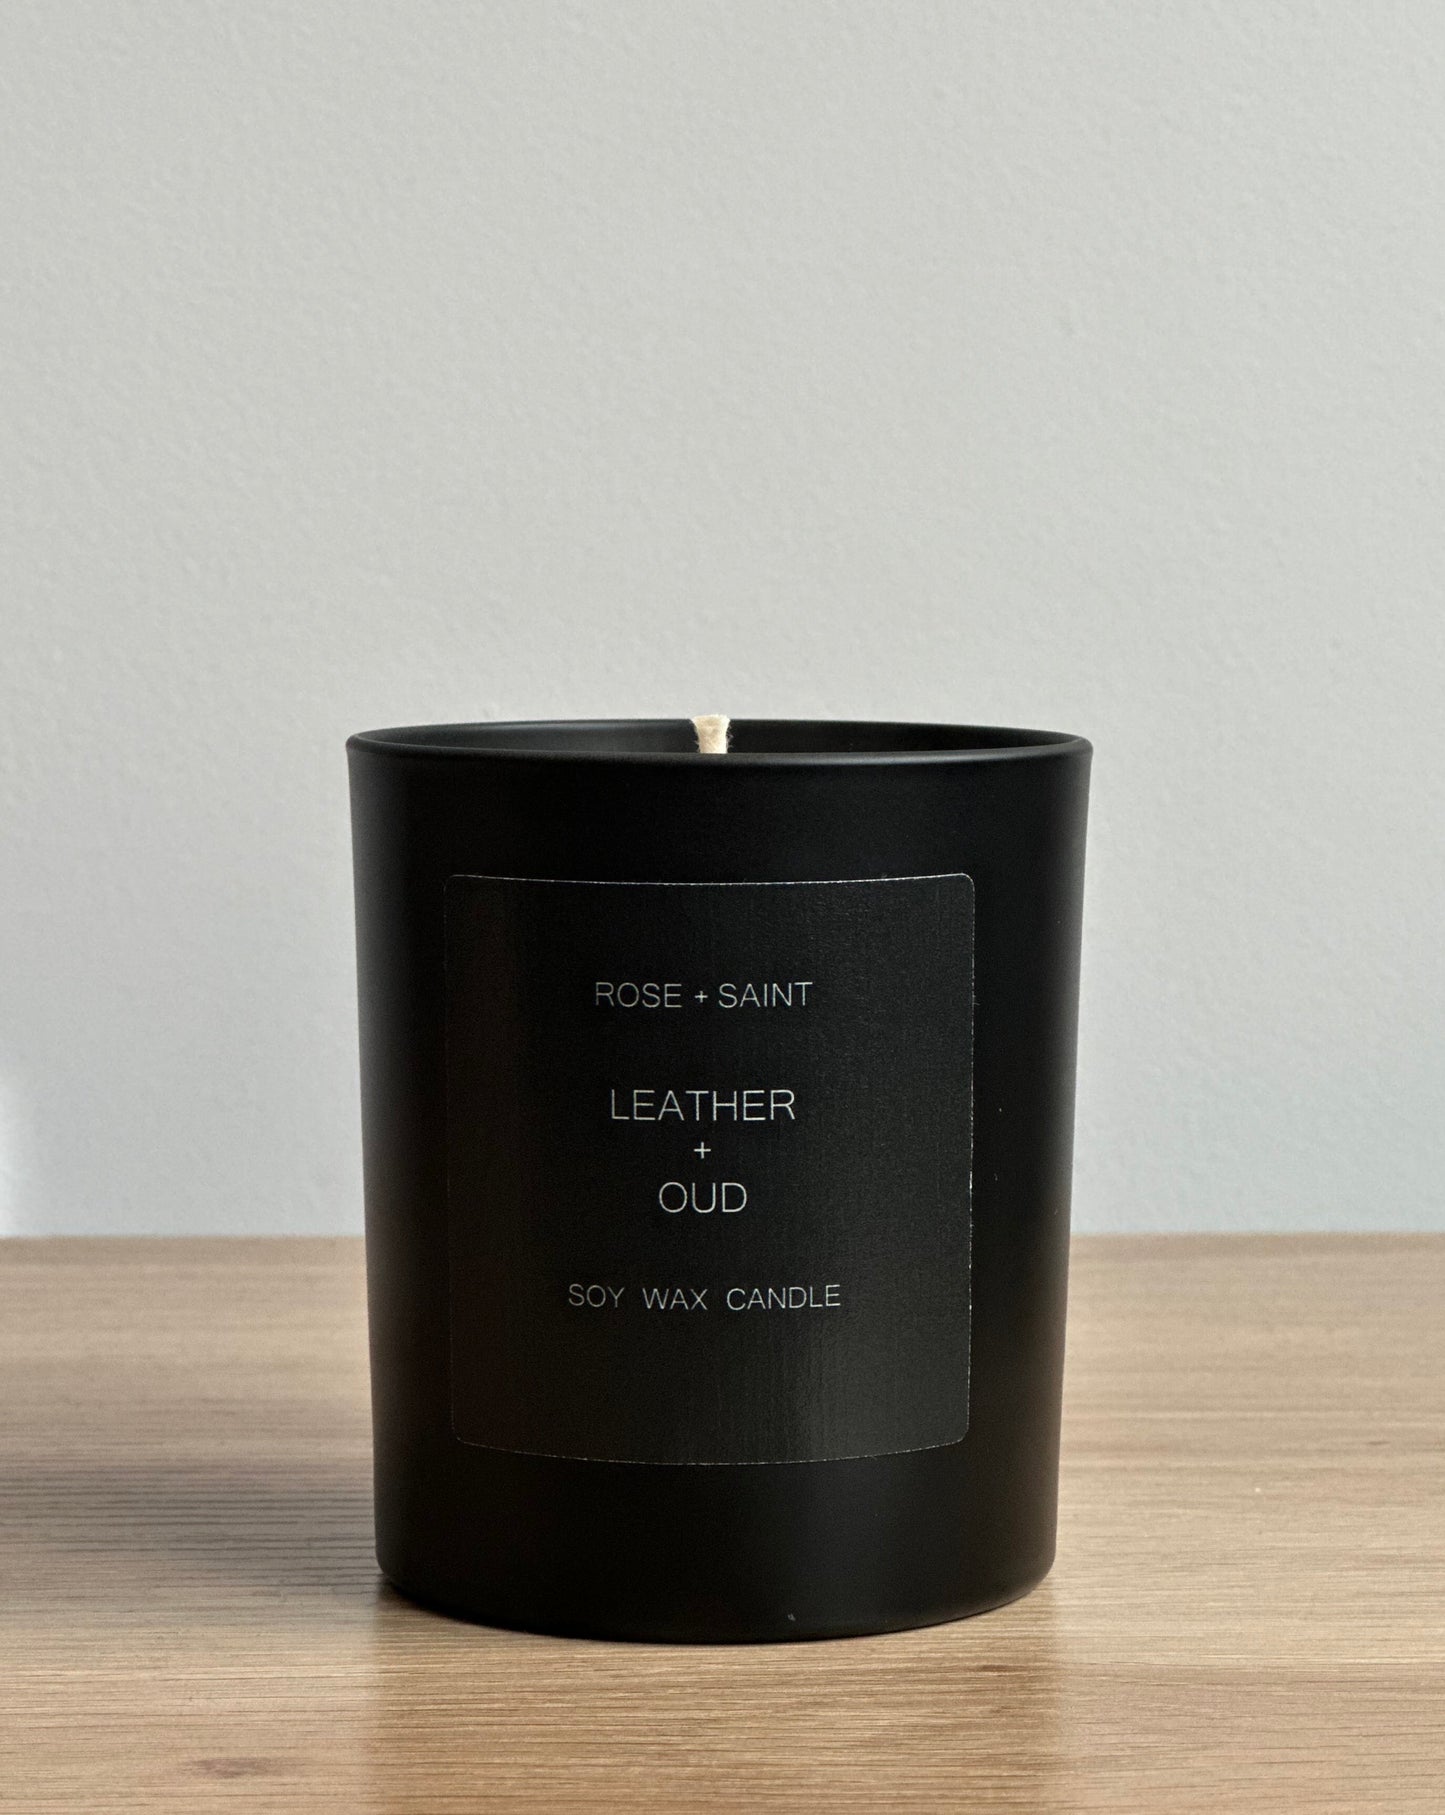 LEATHER + OUD CANDLE